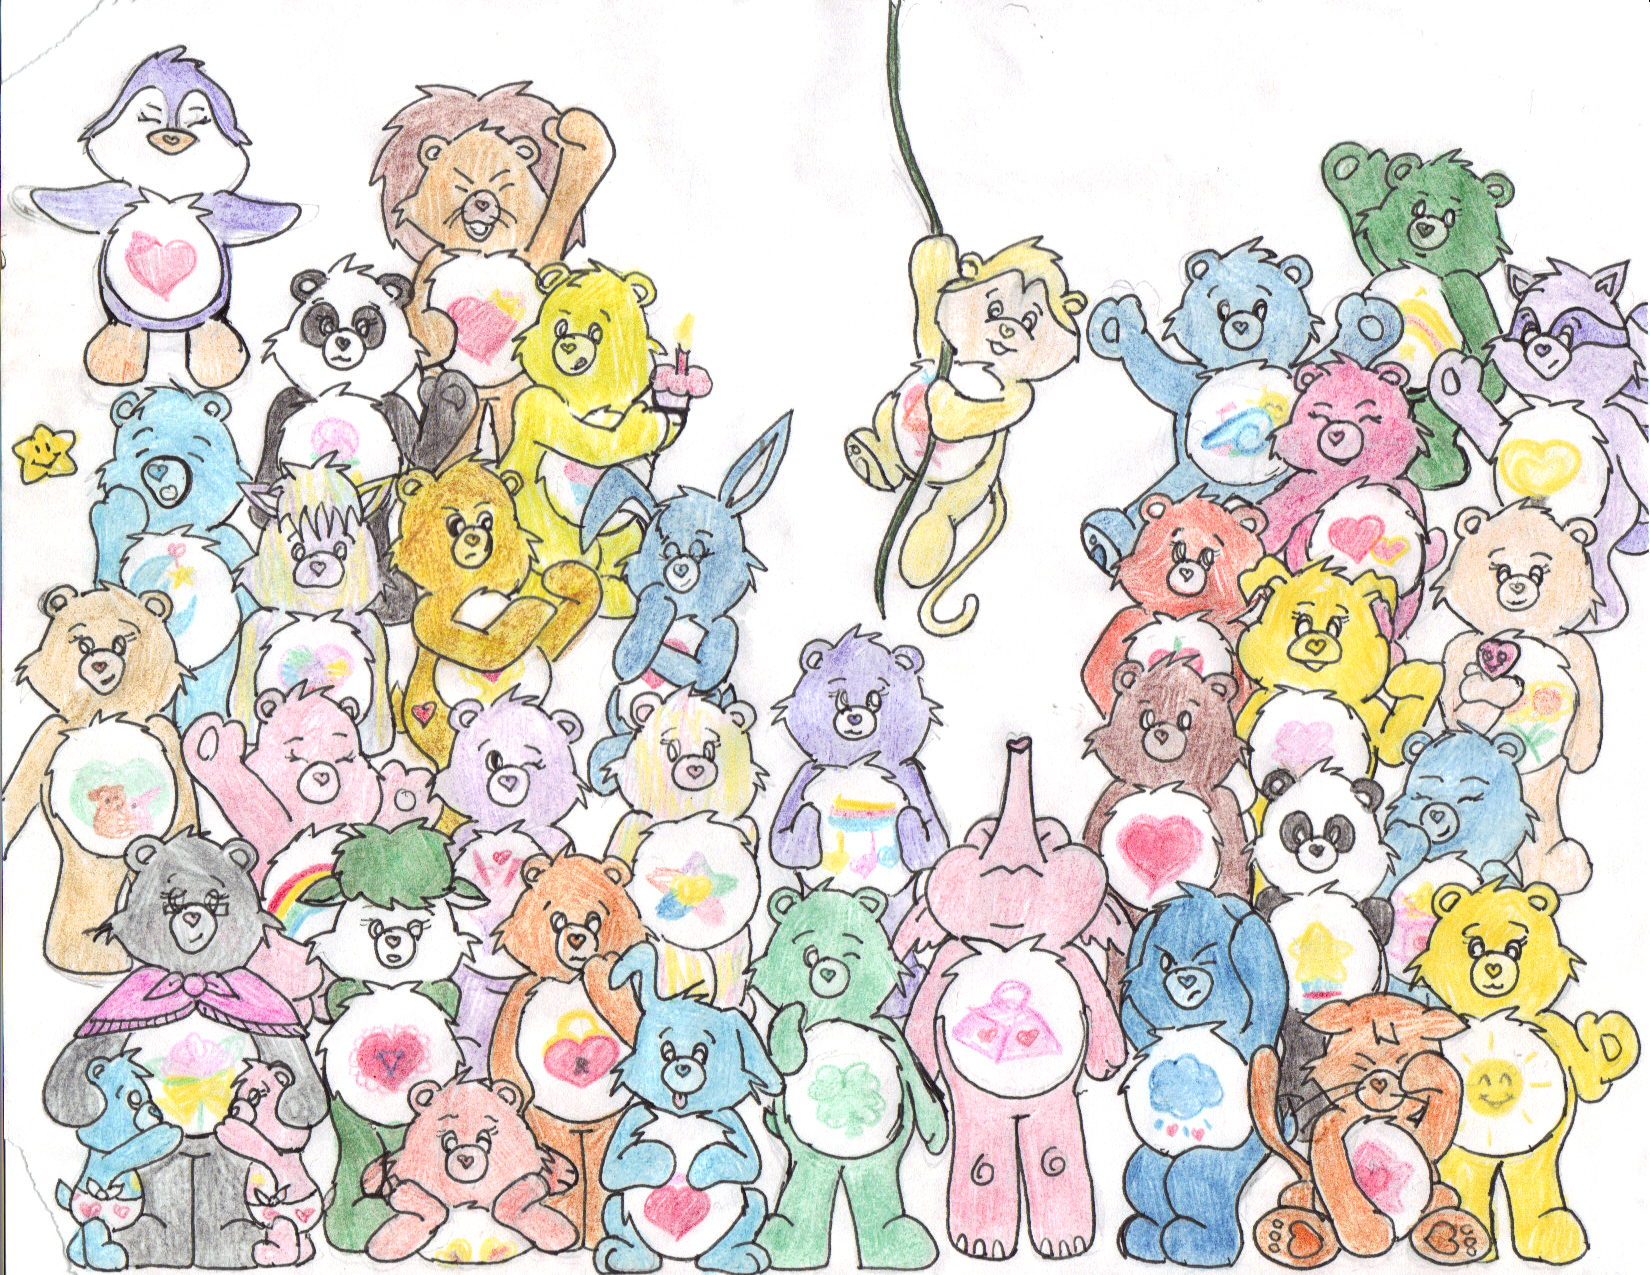 HD wallpaper TV Show The Care Bears  Wallpaper Flare